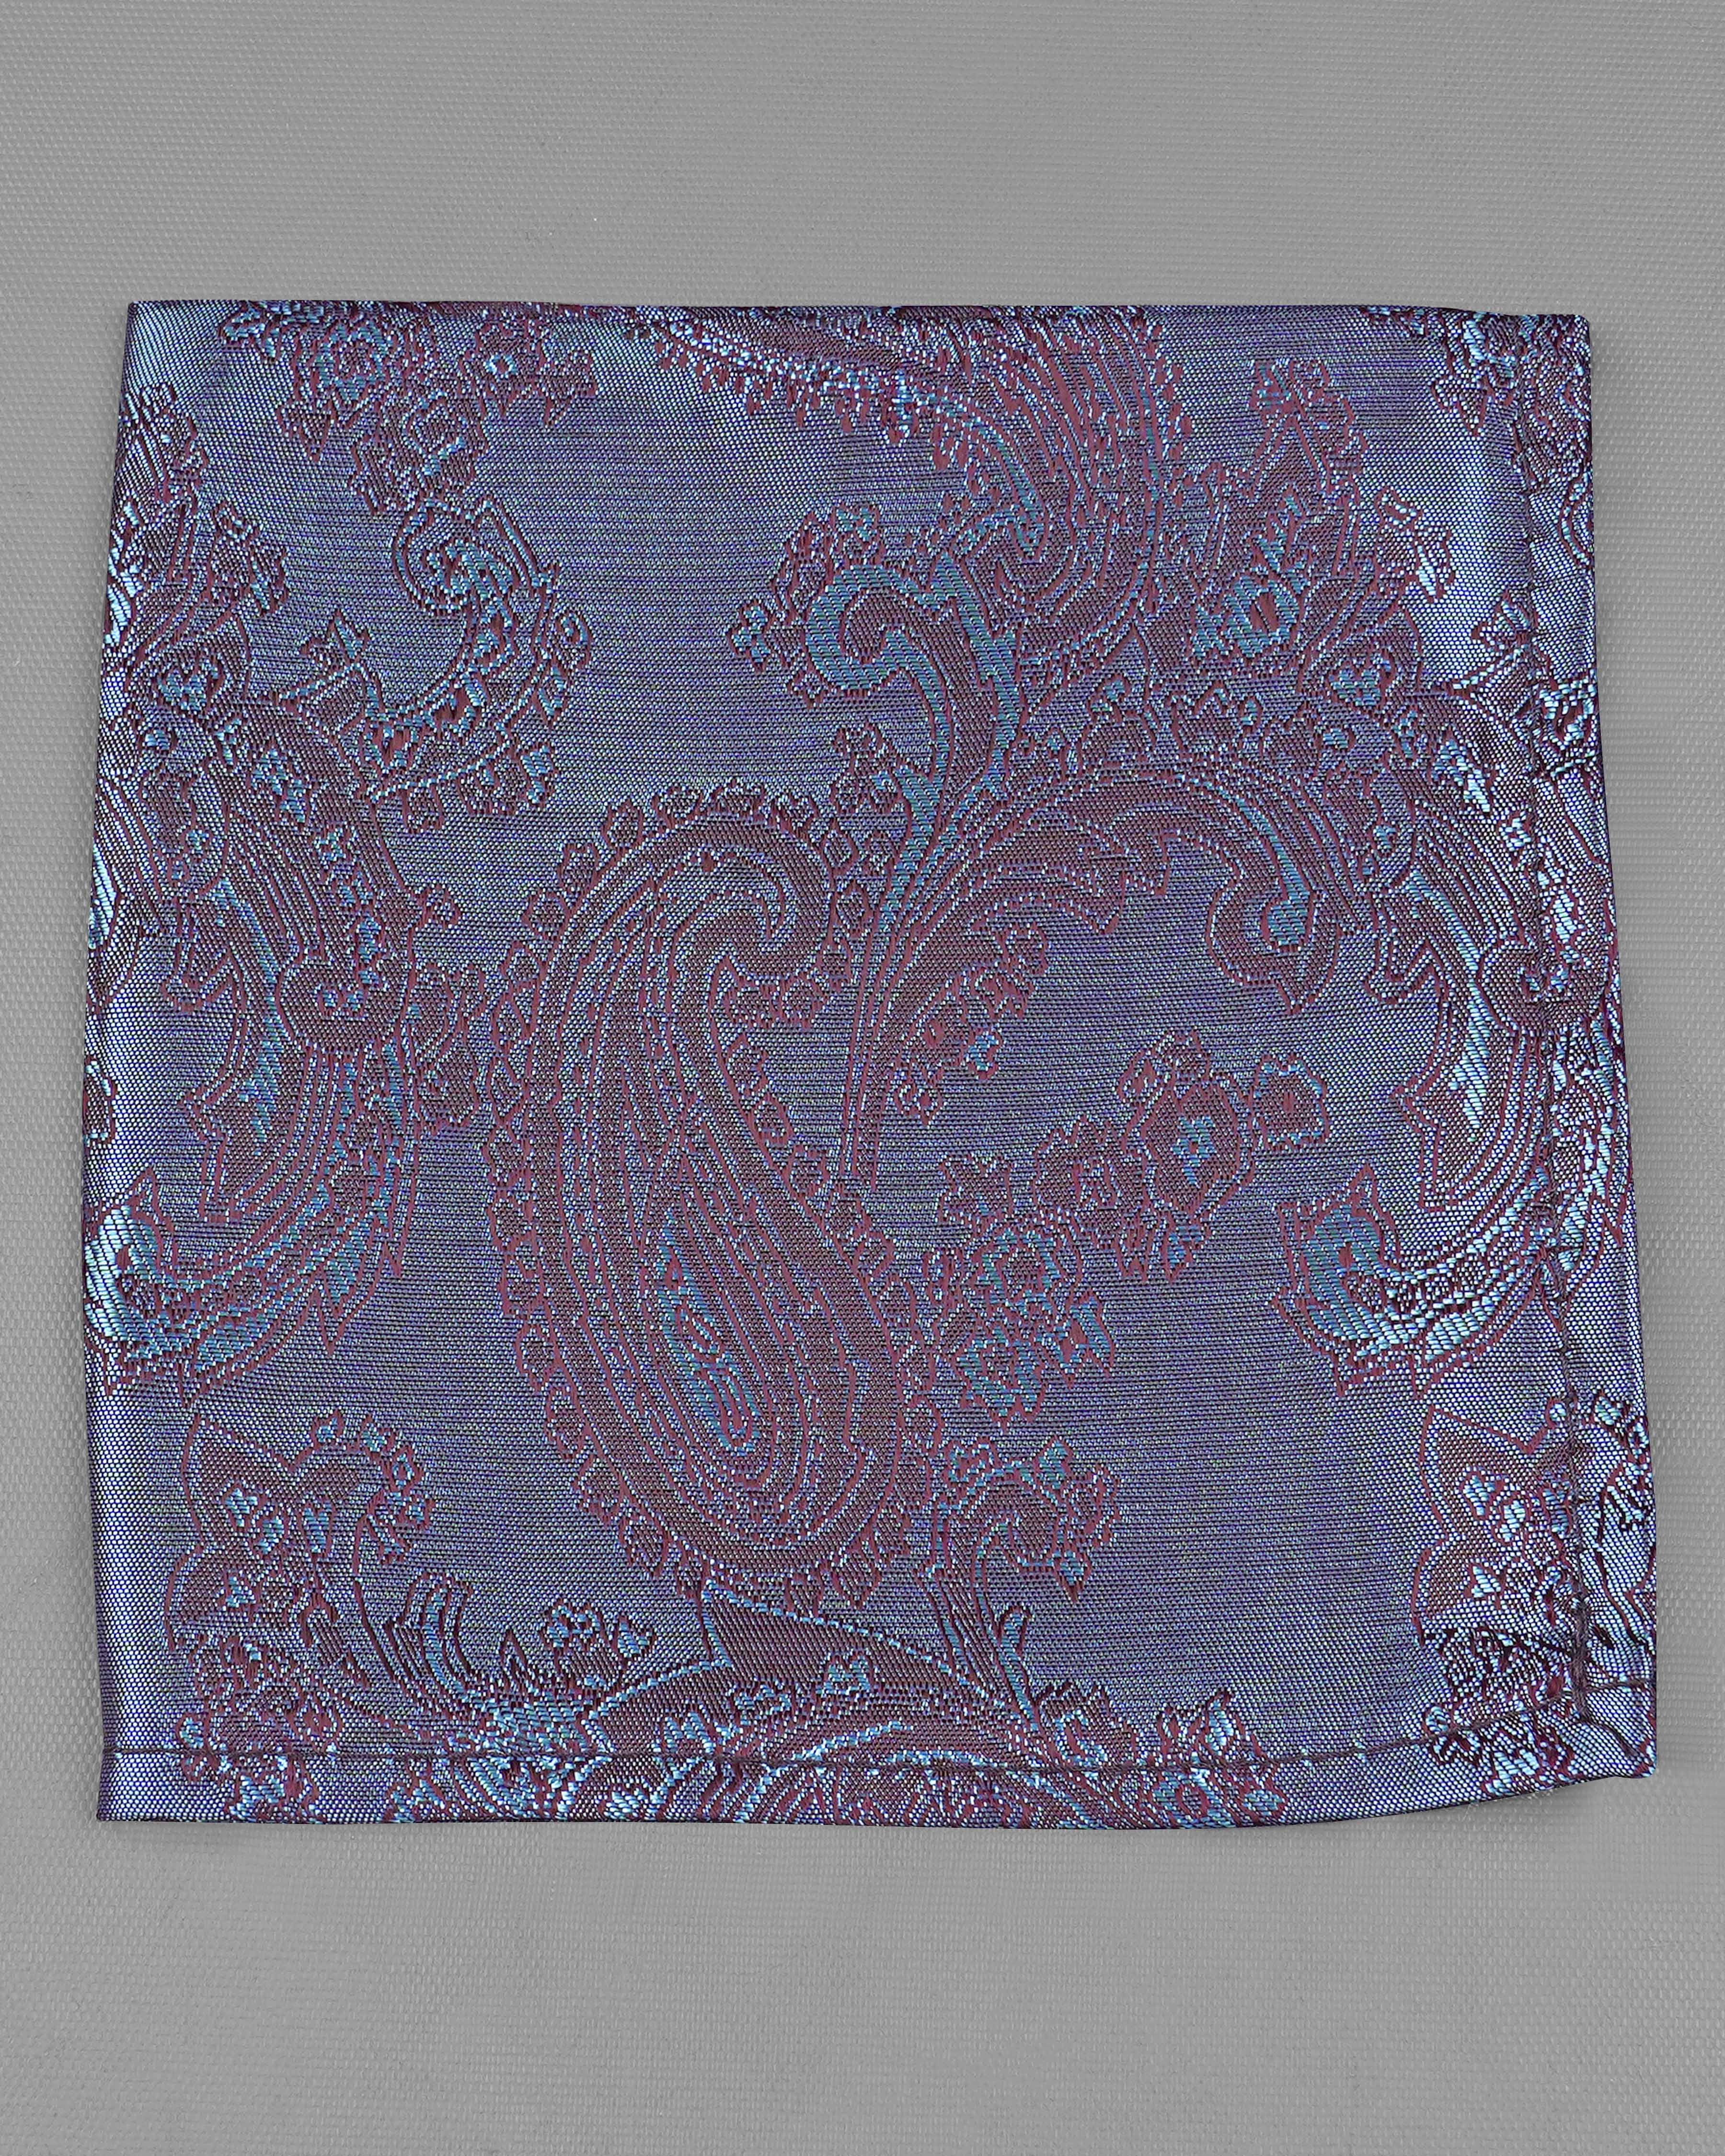 Purplish and Cosmic Maroon Two Tone Paisley Jacquard Tie with Pocket Square TP035